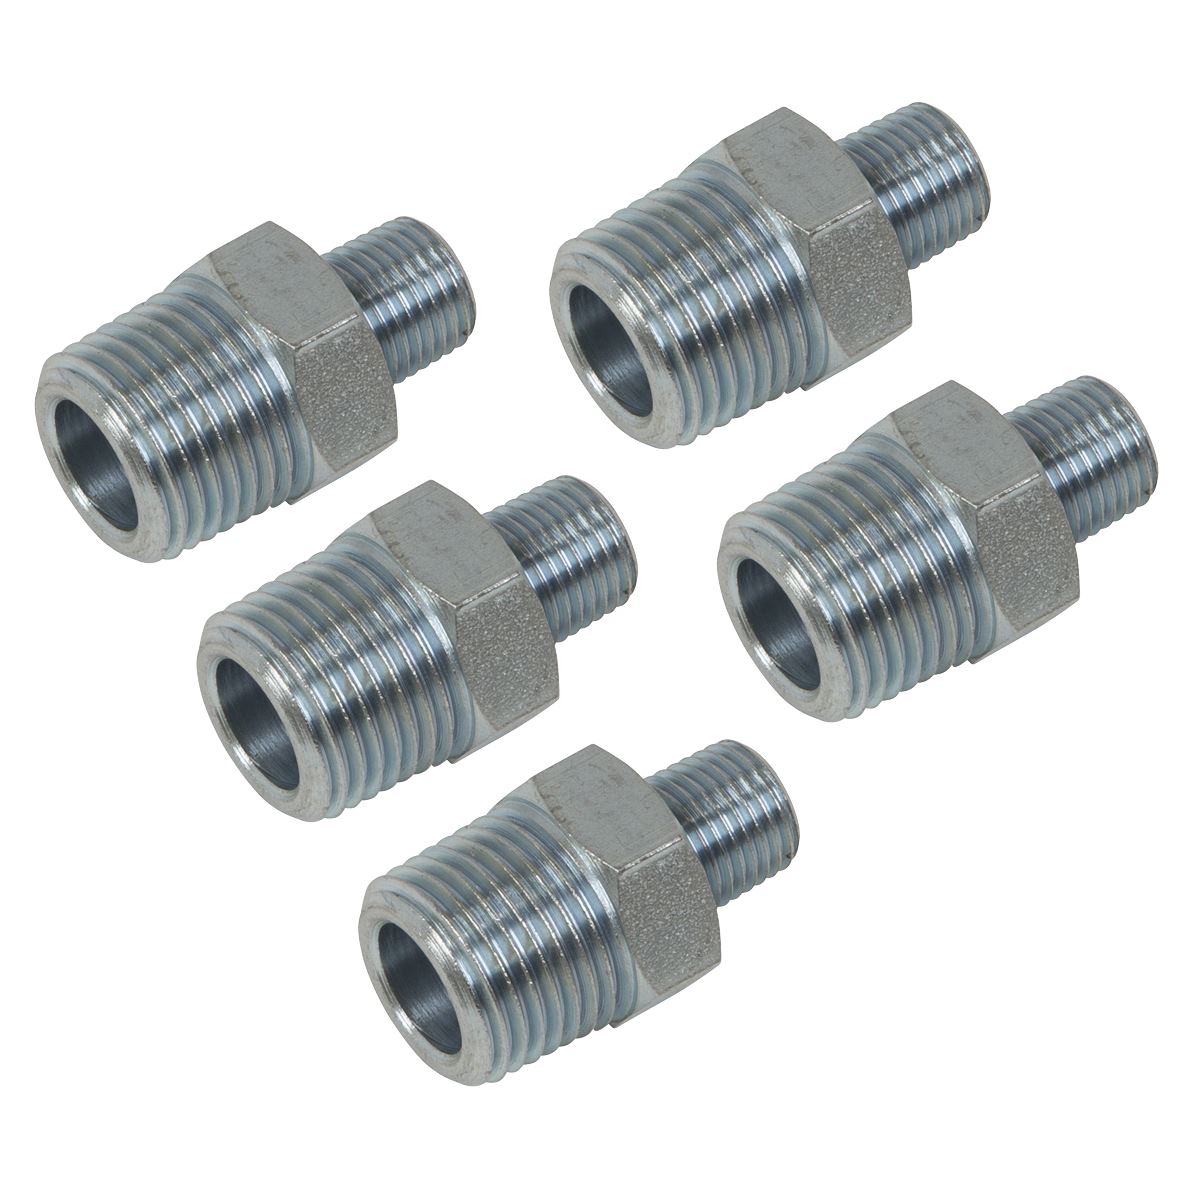 PCL Reducing Union 1/2"BSPT to 1/4"BSPT - Pack of 5